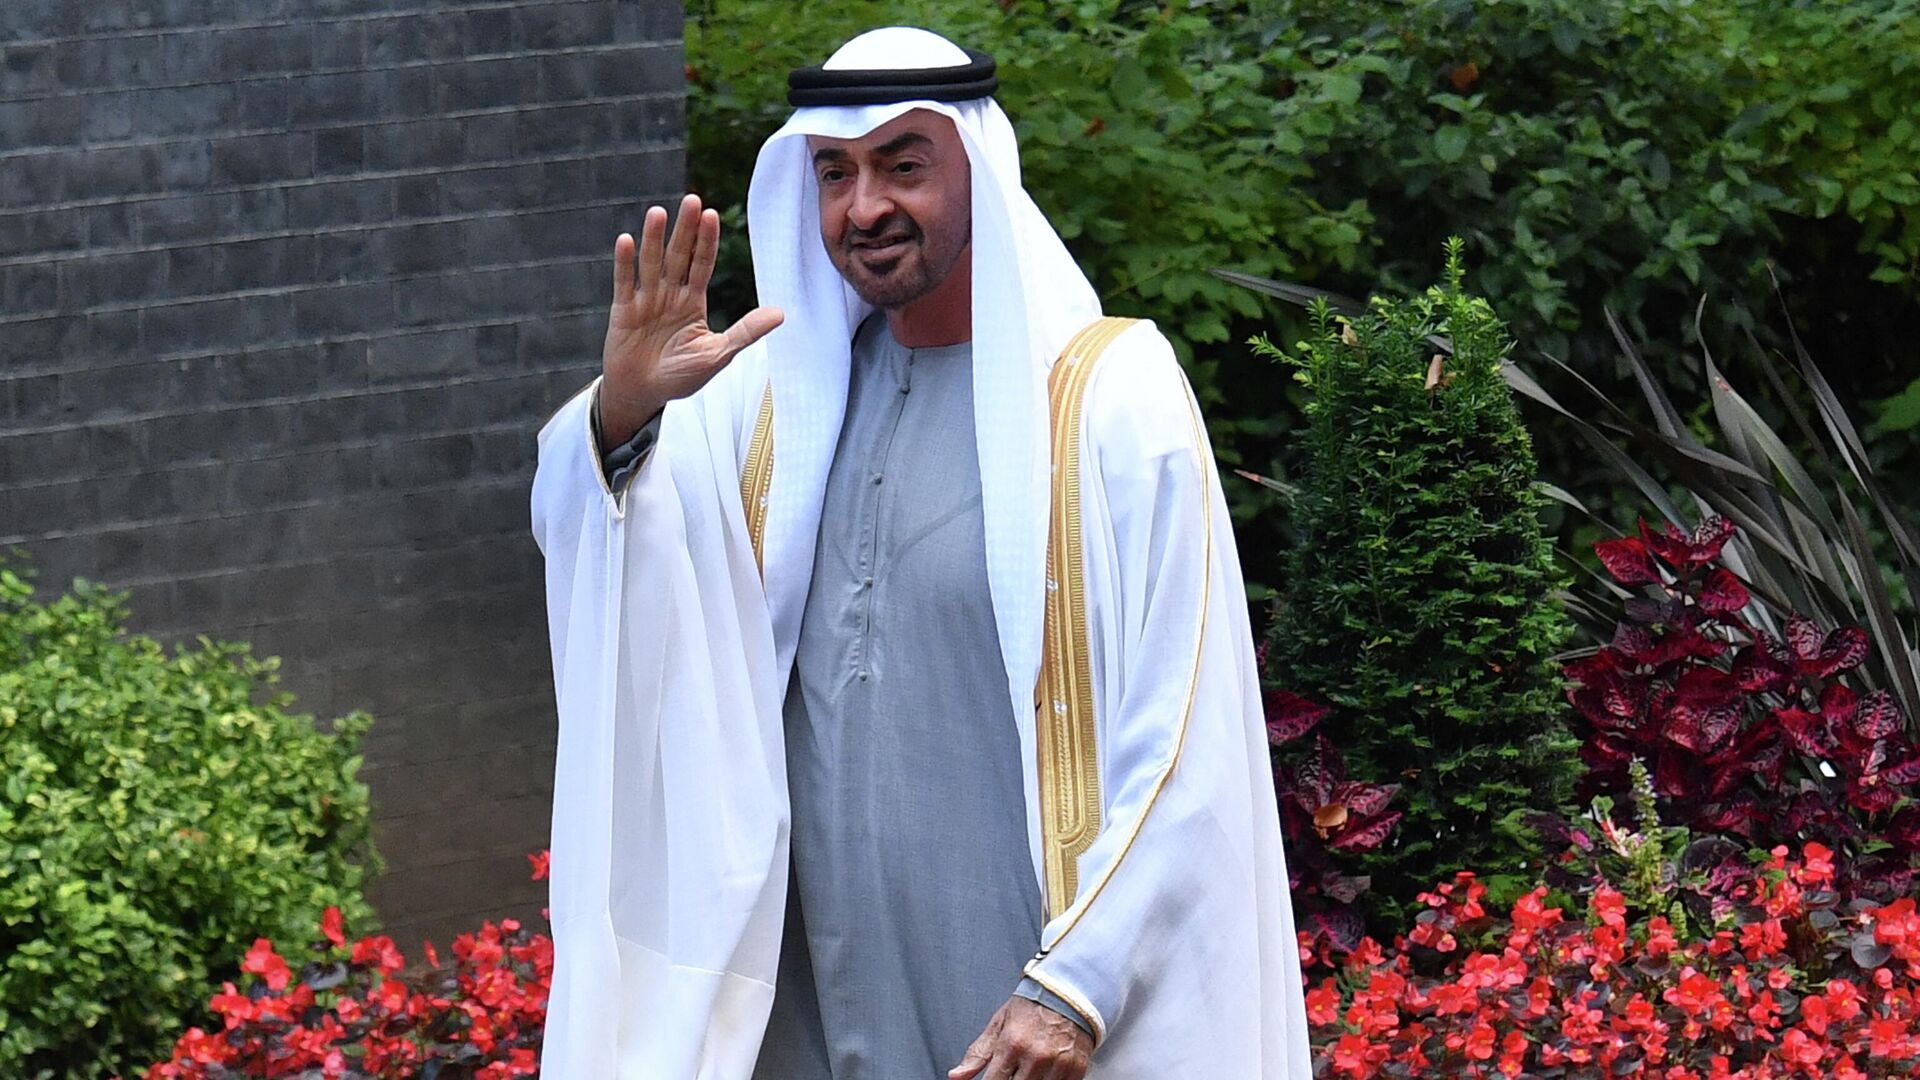 Then-Crown Prince of Abu Dhabi, Mohamed bin Zayed Al Nahyan gestures as he arrives for a meeting with  Britain's Prime Minister Boris Johnson at number 10, Downing Street in central London, on September 16, 2021. - Sputnik International, 1920, 14.05.2022